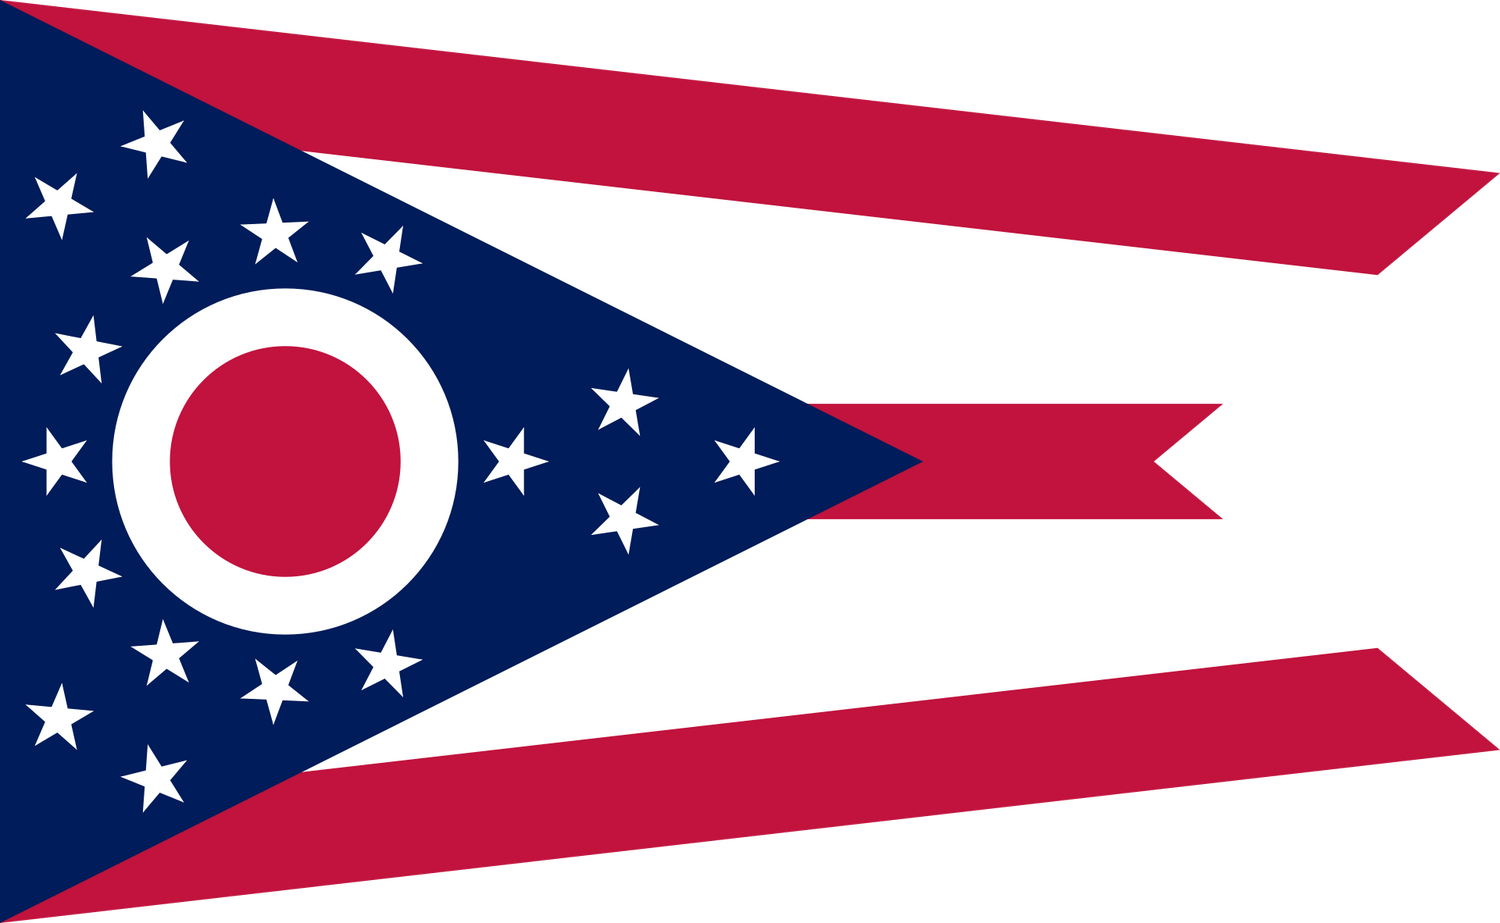 The official state flag of Ohio was adopted in 1902 and showcases a Guidon consisting of 5 horizontal stripes alternating between red and white. - History By Mail